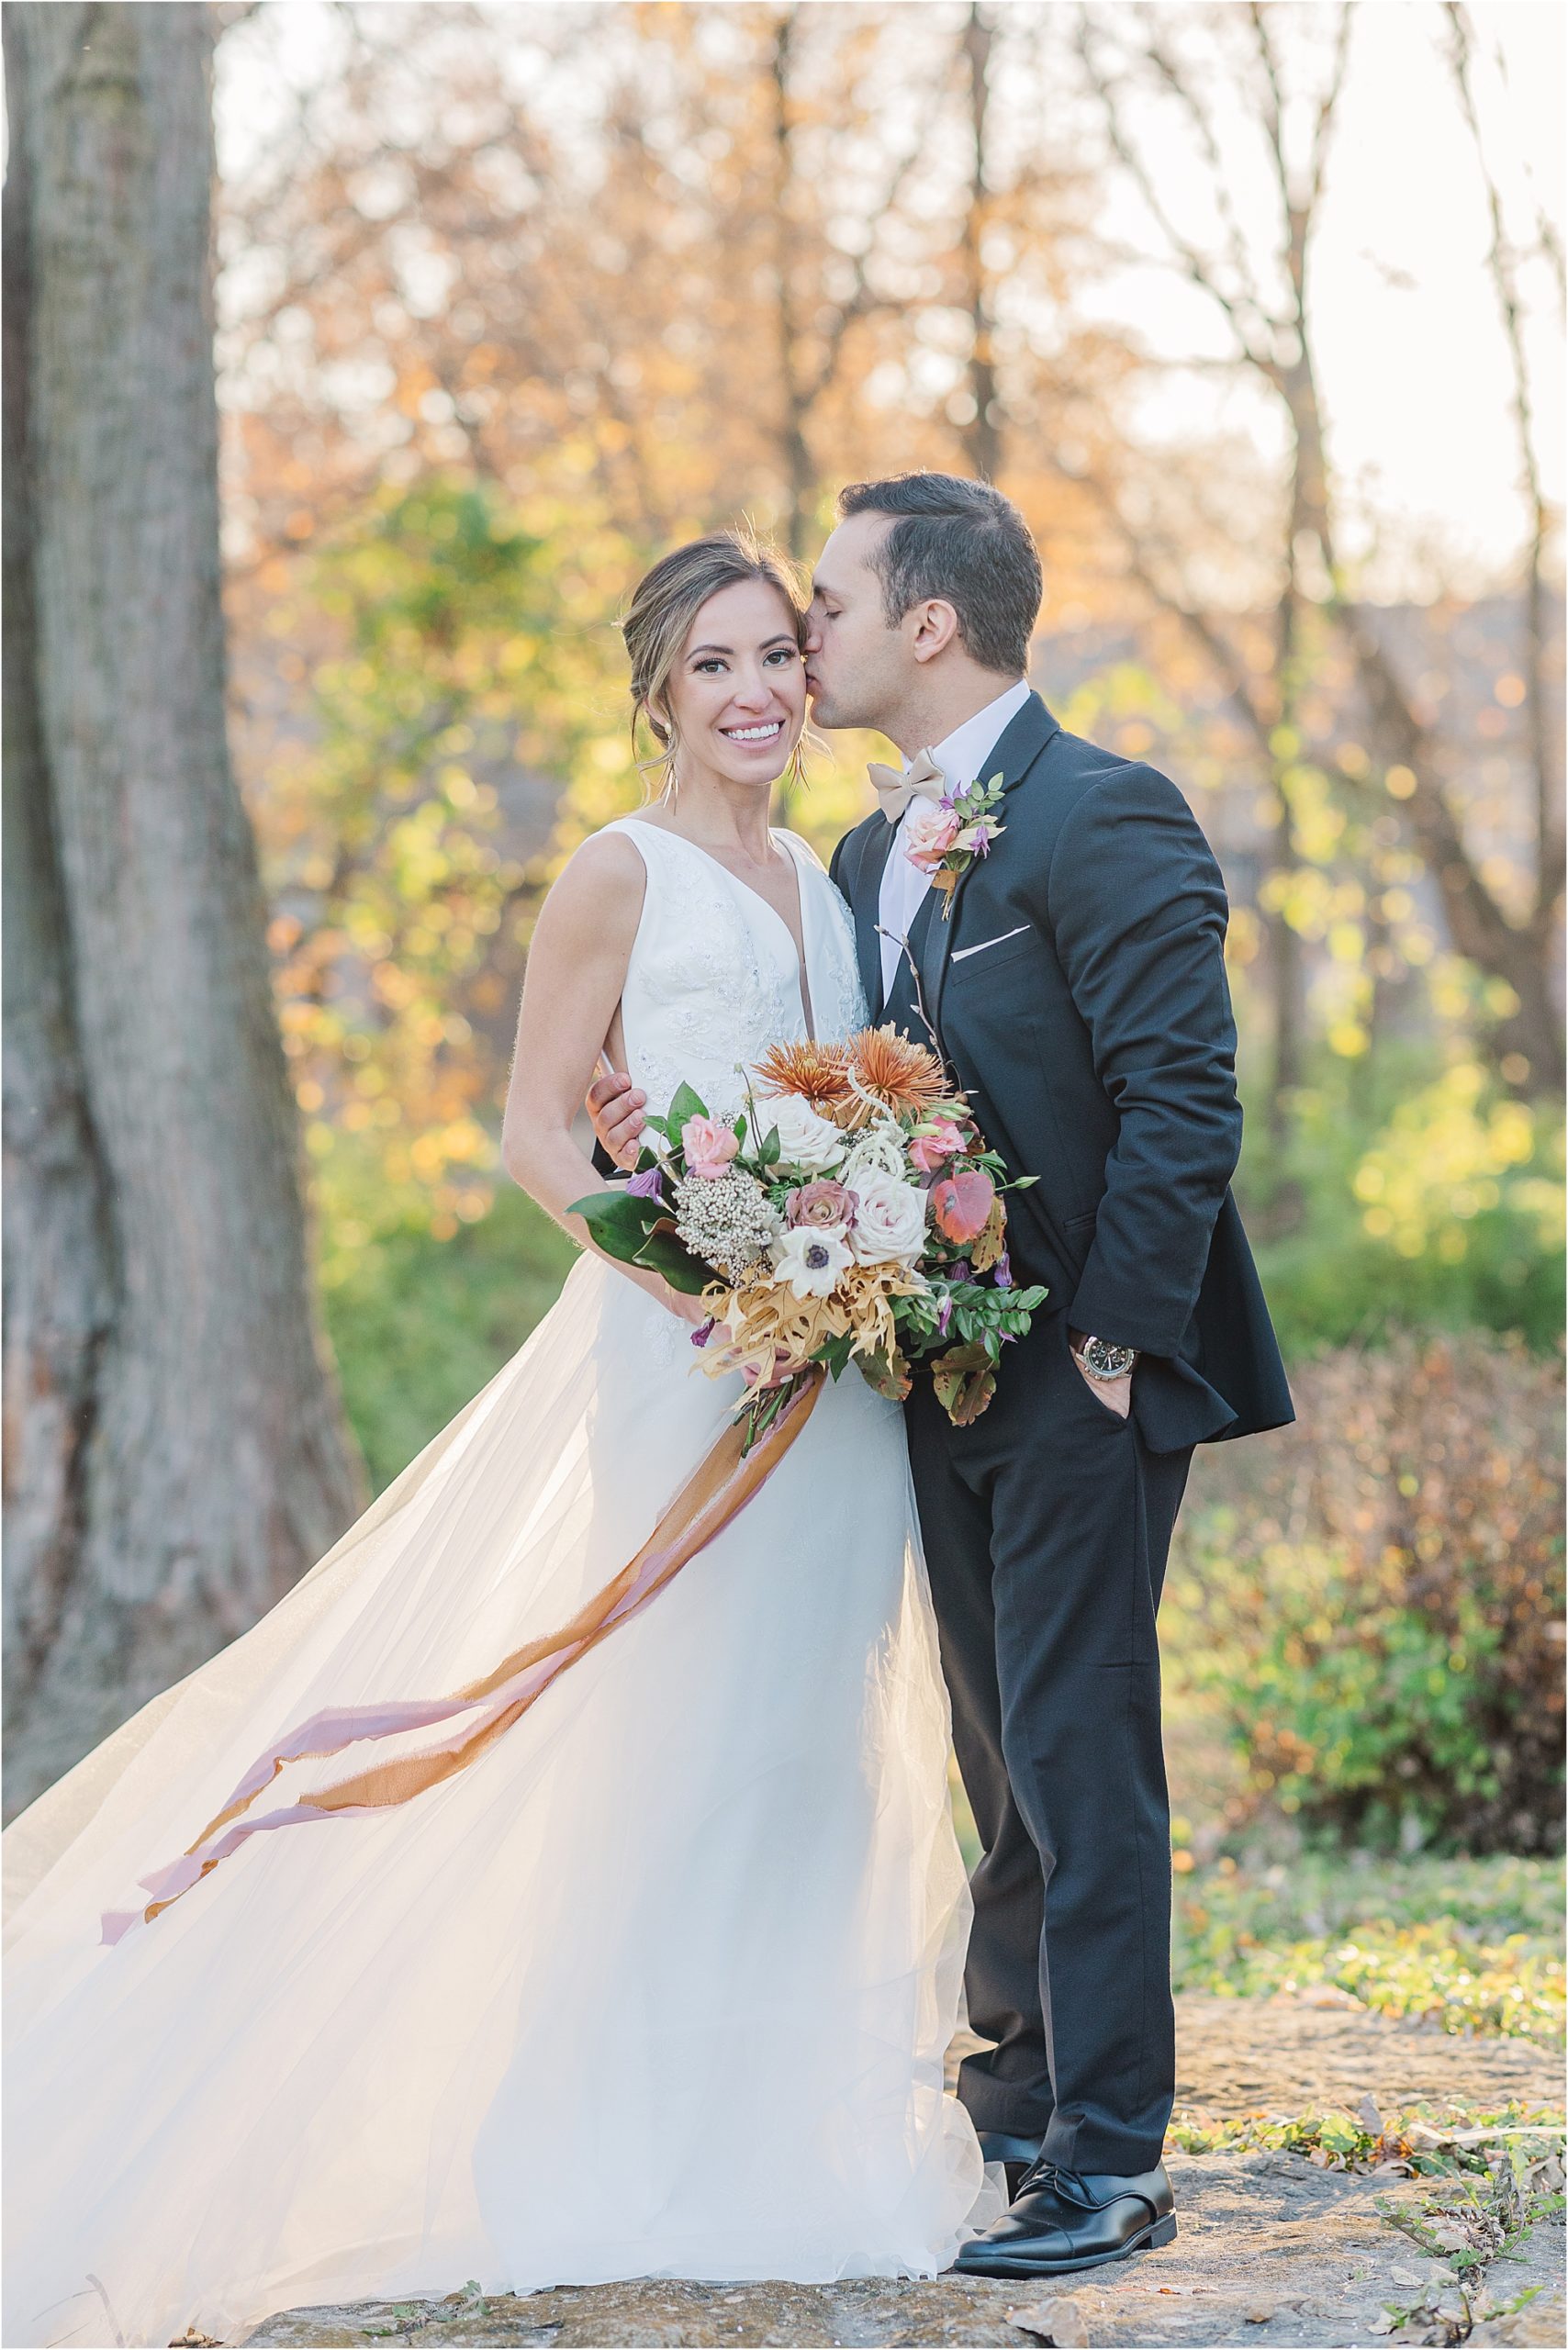 Must-have photos from your wedding day | Missouri wedding photographer | Kelsey Alumbaugh Photography | #missouriweddingphotographer #midwestweddingphotographer #weddingphotographer